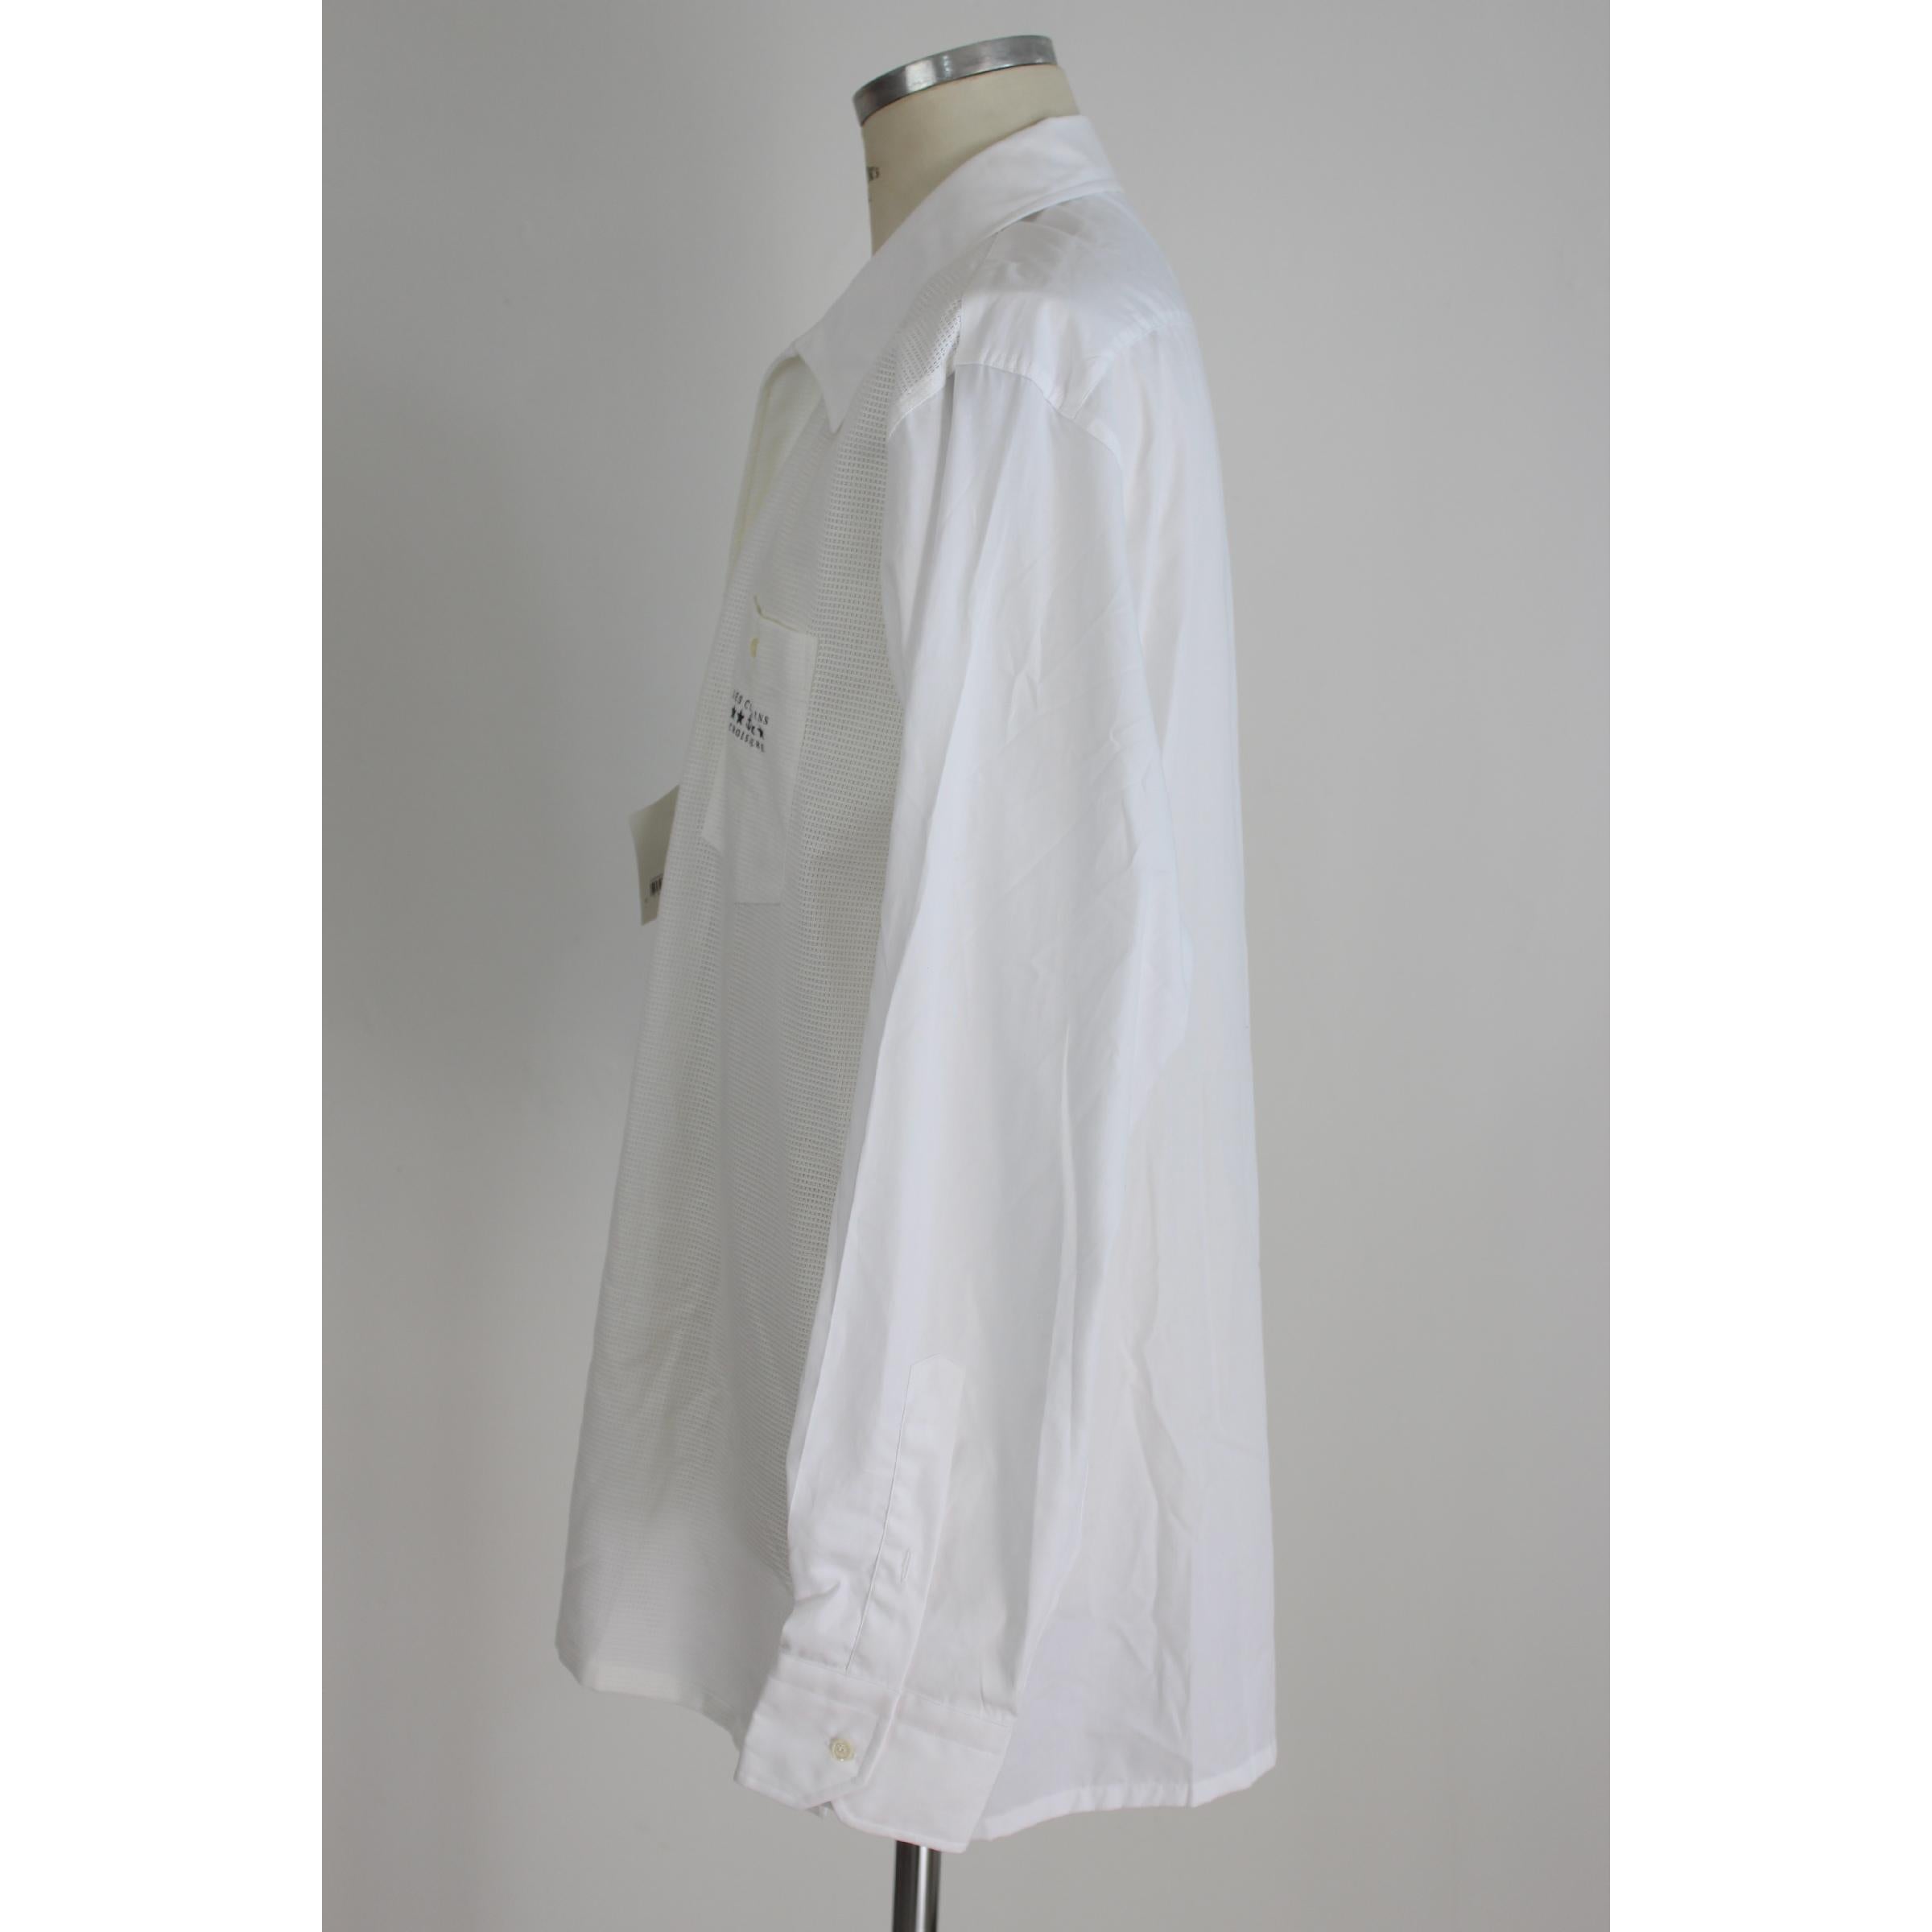 Les Copains men's casual shirt in cotton. Wide white model with logo on the chest pocket. Made in Italy. New with label.

Size 44 It 34 Us 34 Uk

Shoulder: 54 cm
Length: 90 cm
Bust / chest: 63 cm
Sleeves: 68 cm
